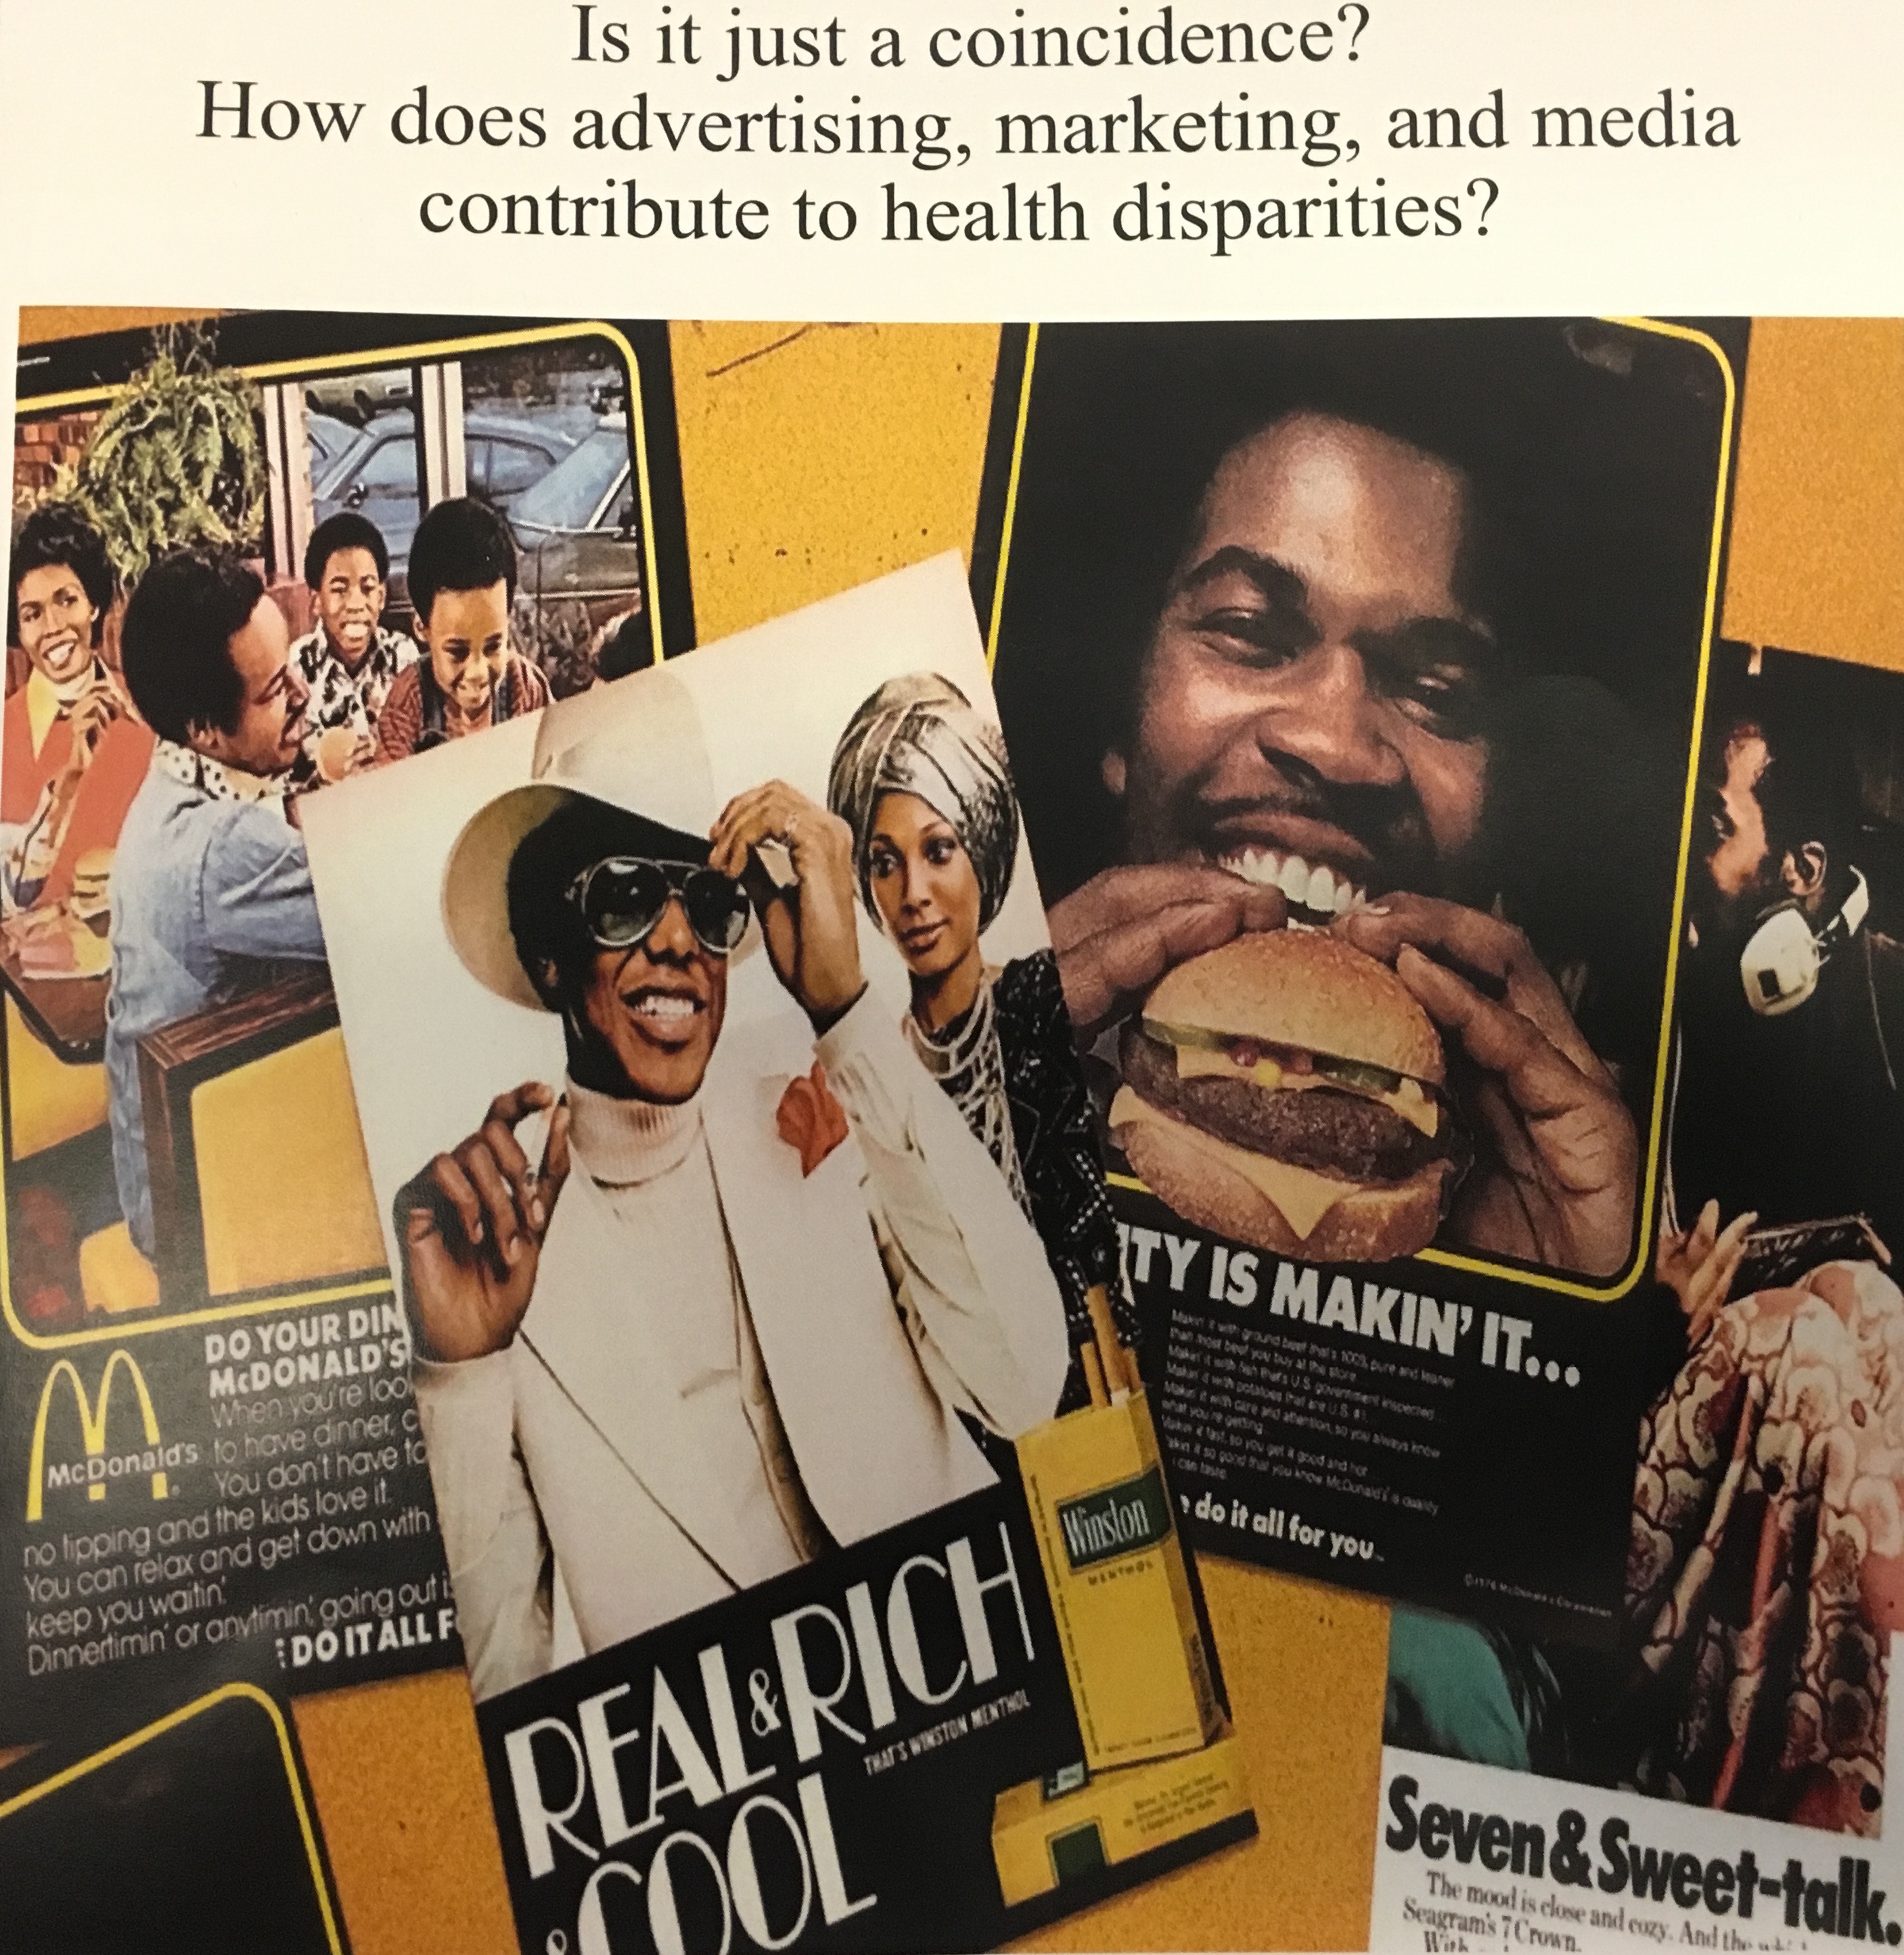 Shown above: examples of advertisements and media materials throughout the years targeting racial/ethnic minorities and ultimately contributing to health disparities. Image taken from cover of Pre-conference and Multicultural Mixer Program materials.